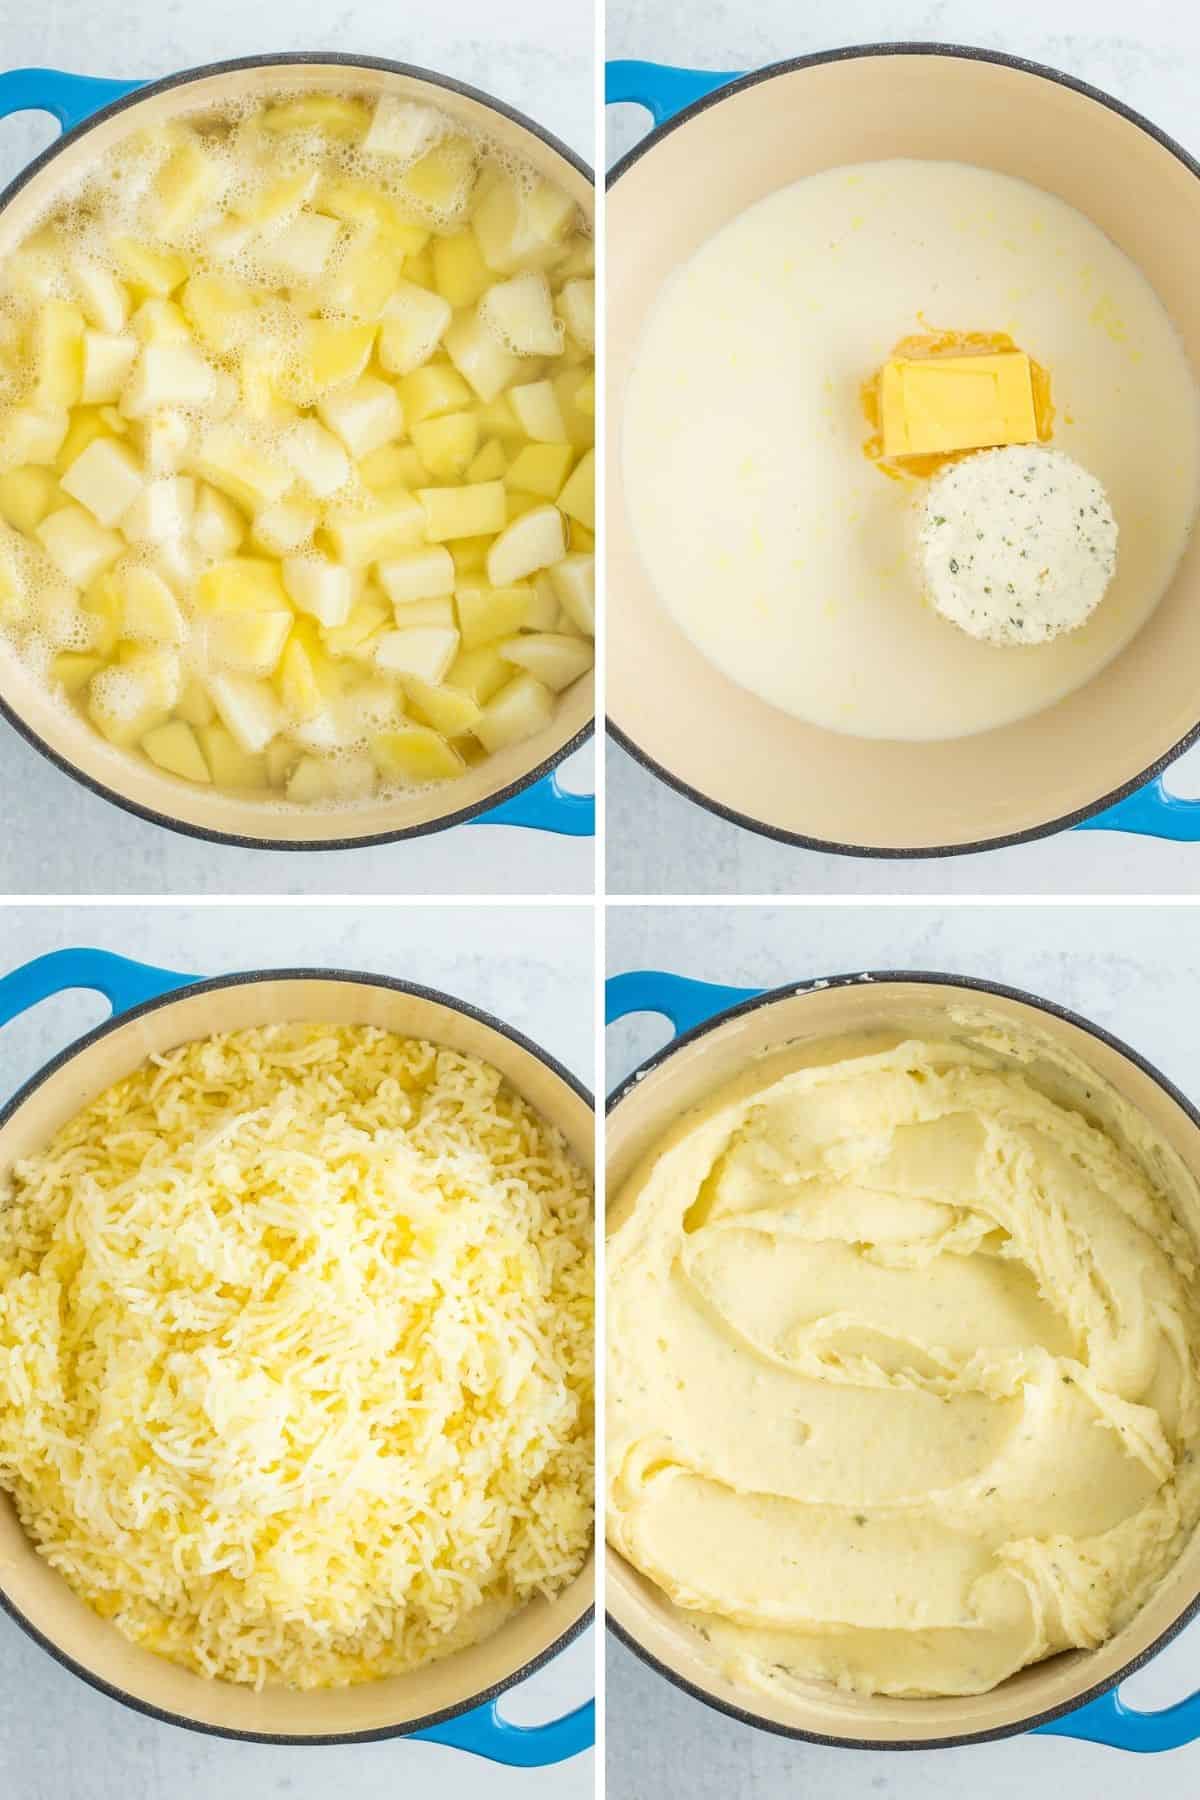 4 photos showing how to make mashed potatoes with Boursin cheese.